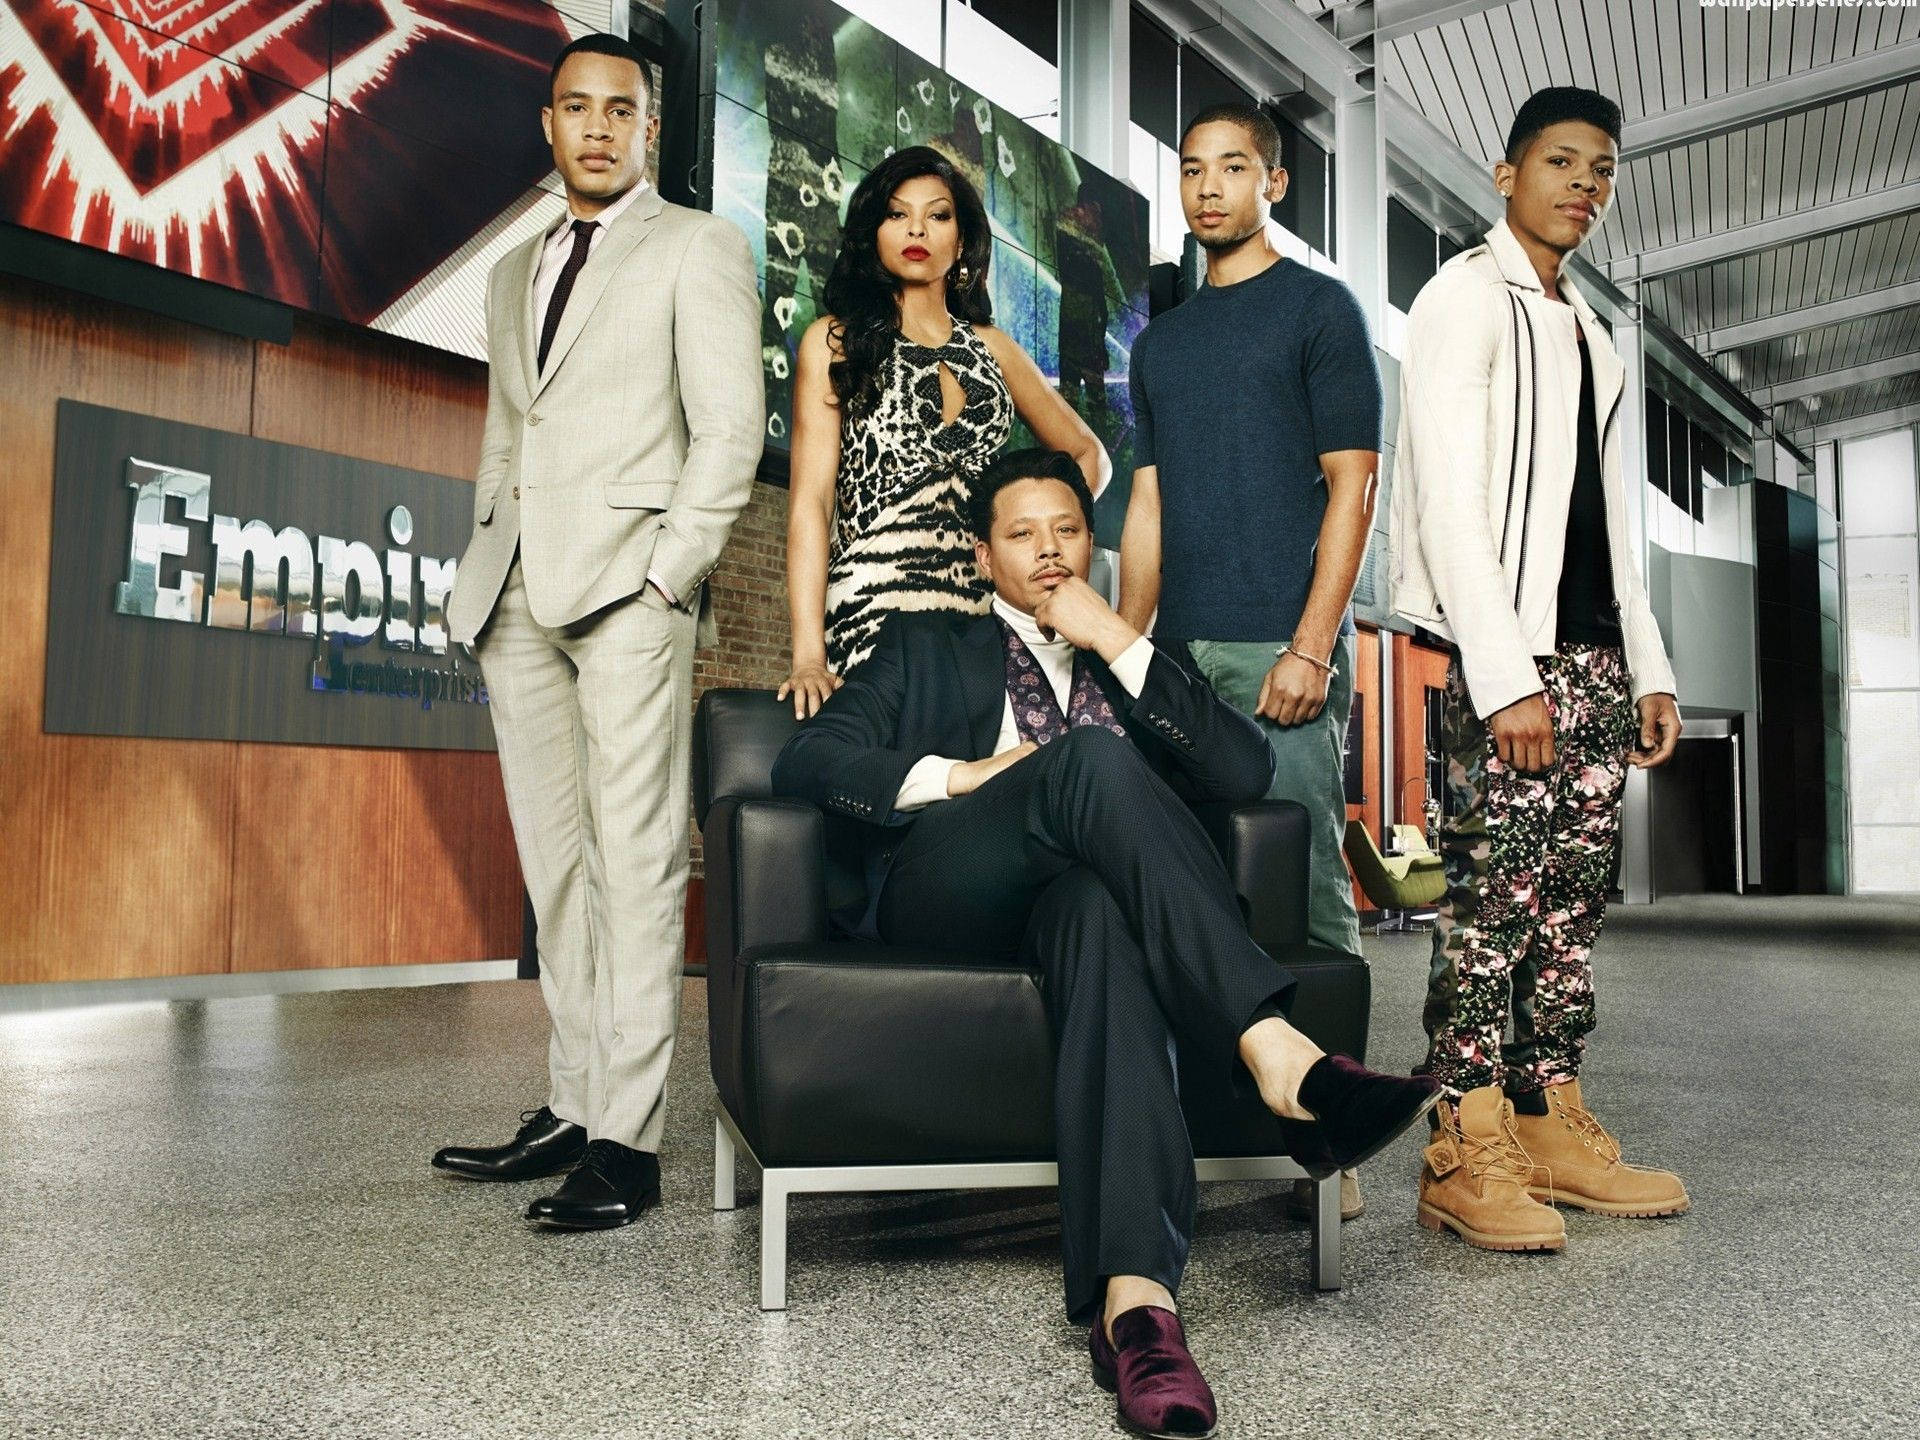 Tv Show Empire With Terrence Howard Background